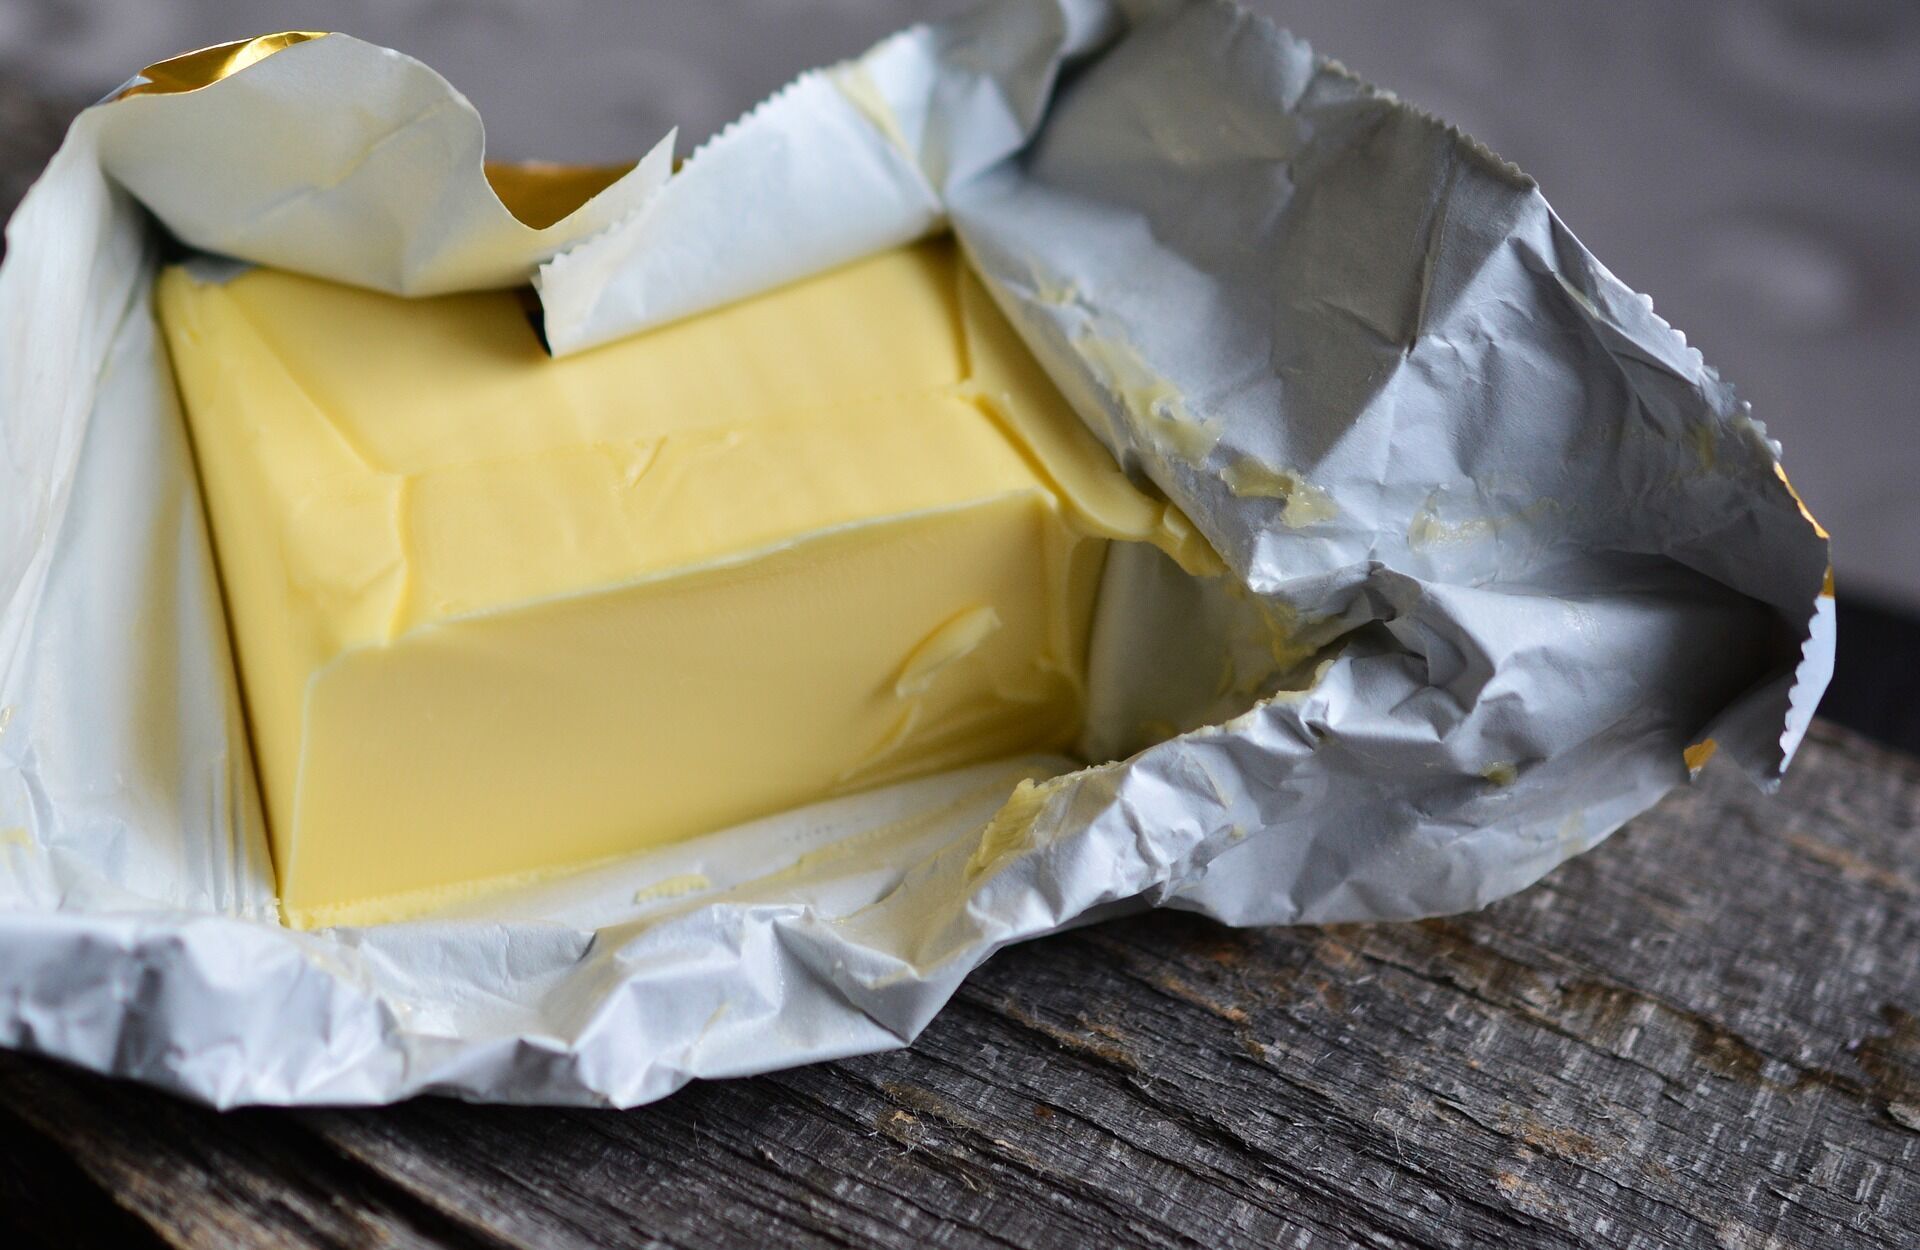 Butter will give the dish a very delicate flavor